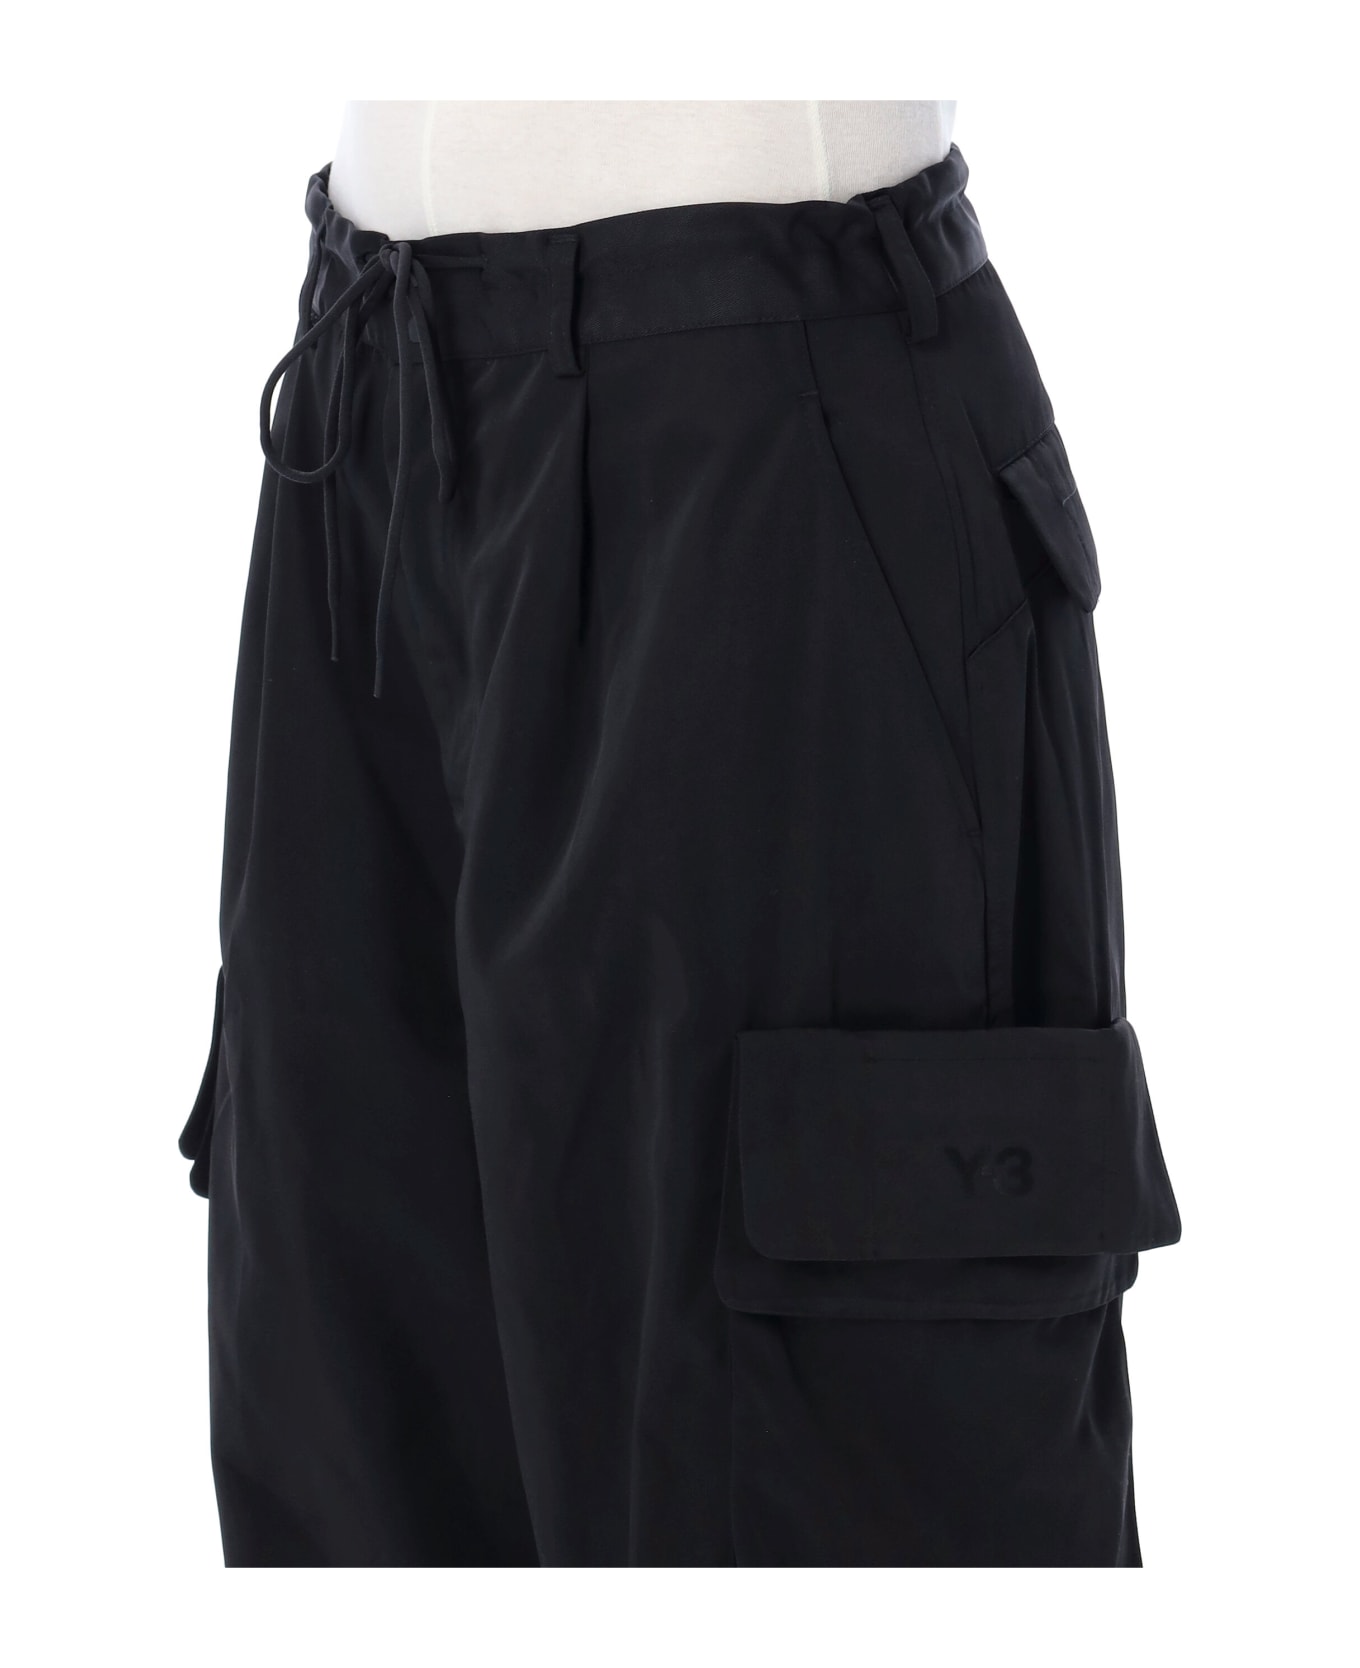 Y-3 Cargo Trousers - BLACK ボトムス